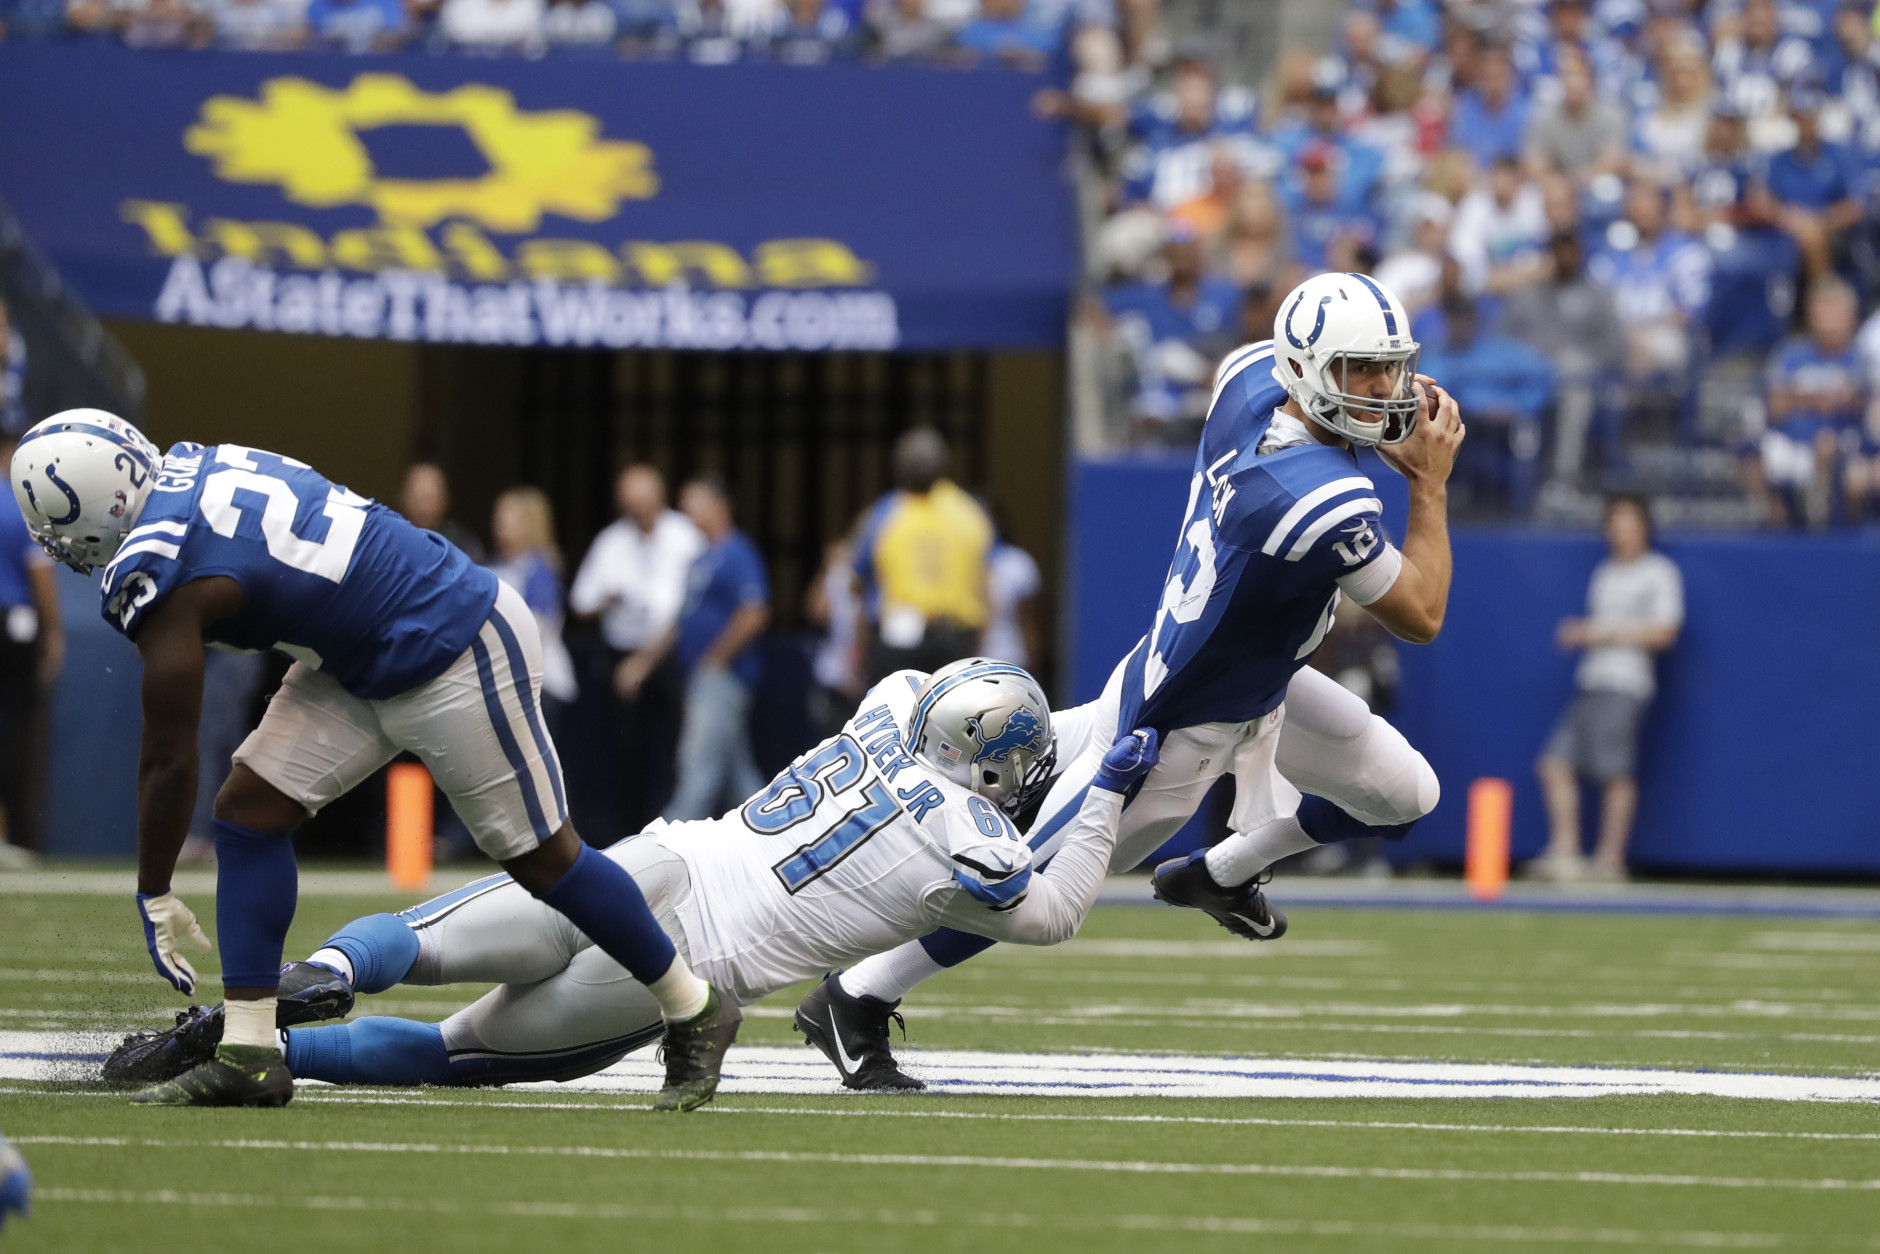 Detroit Lions defensive end Kerry Hyder (61) sacks Indianapolis Colts quarterback Andrew Luck (12) during the first half of an NFL football game in Indianapolis, Sunday, Sept. 11, 2016. (AP Photo/Jeff Roberson)